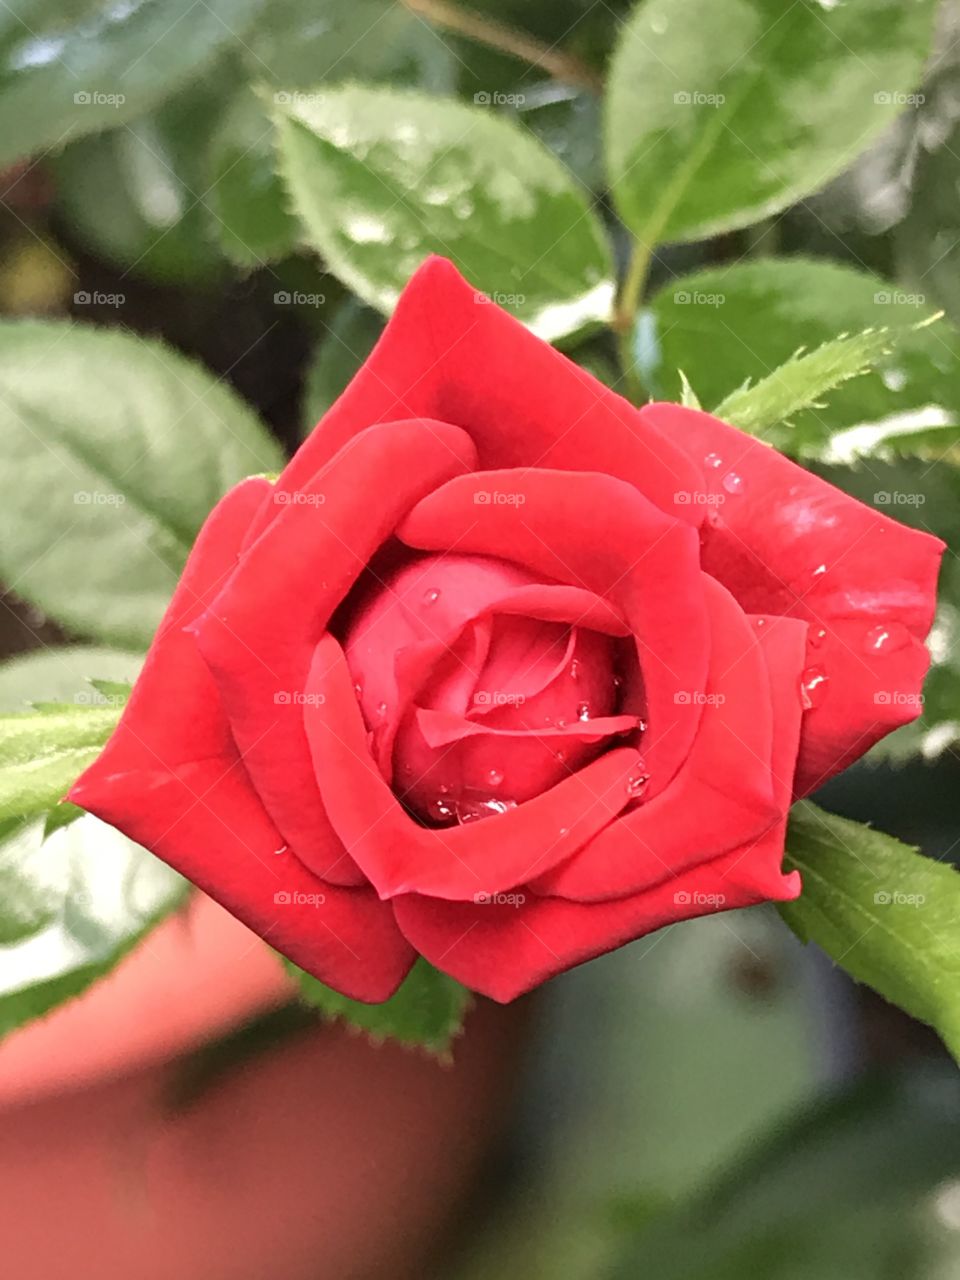 The Red Rose 